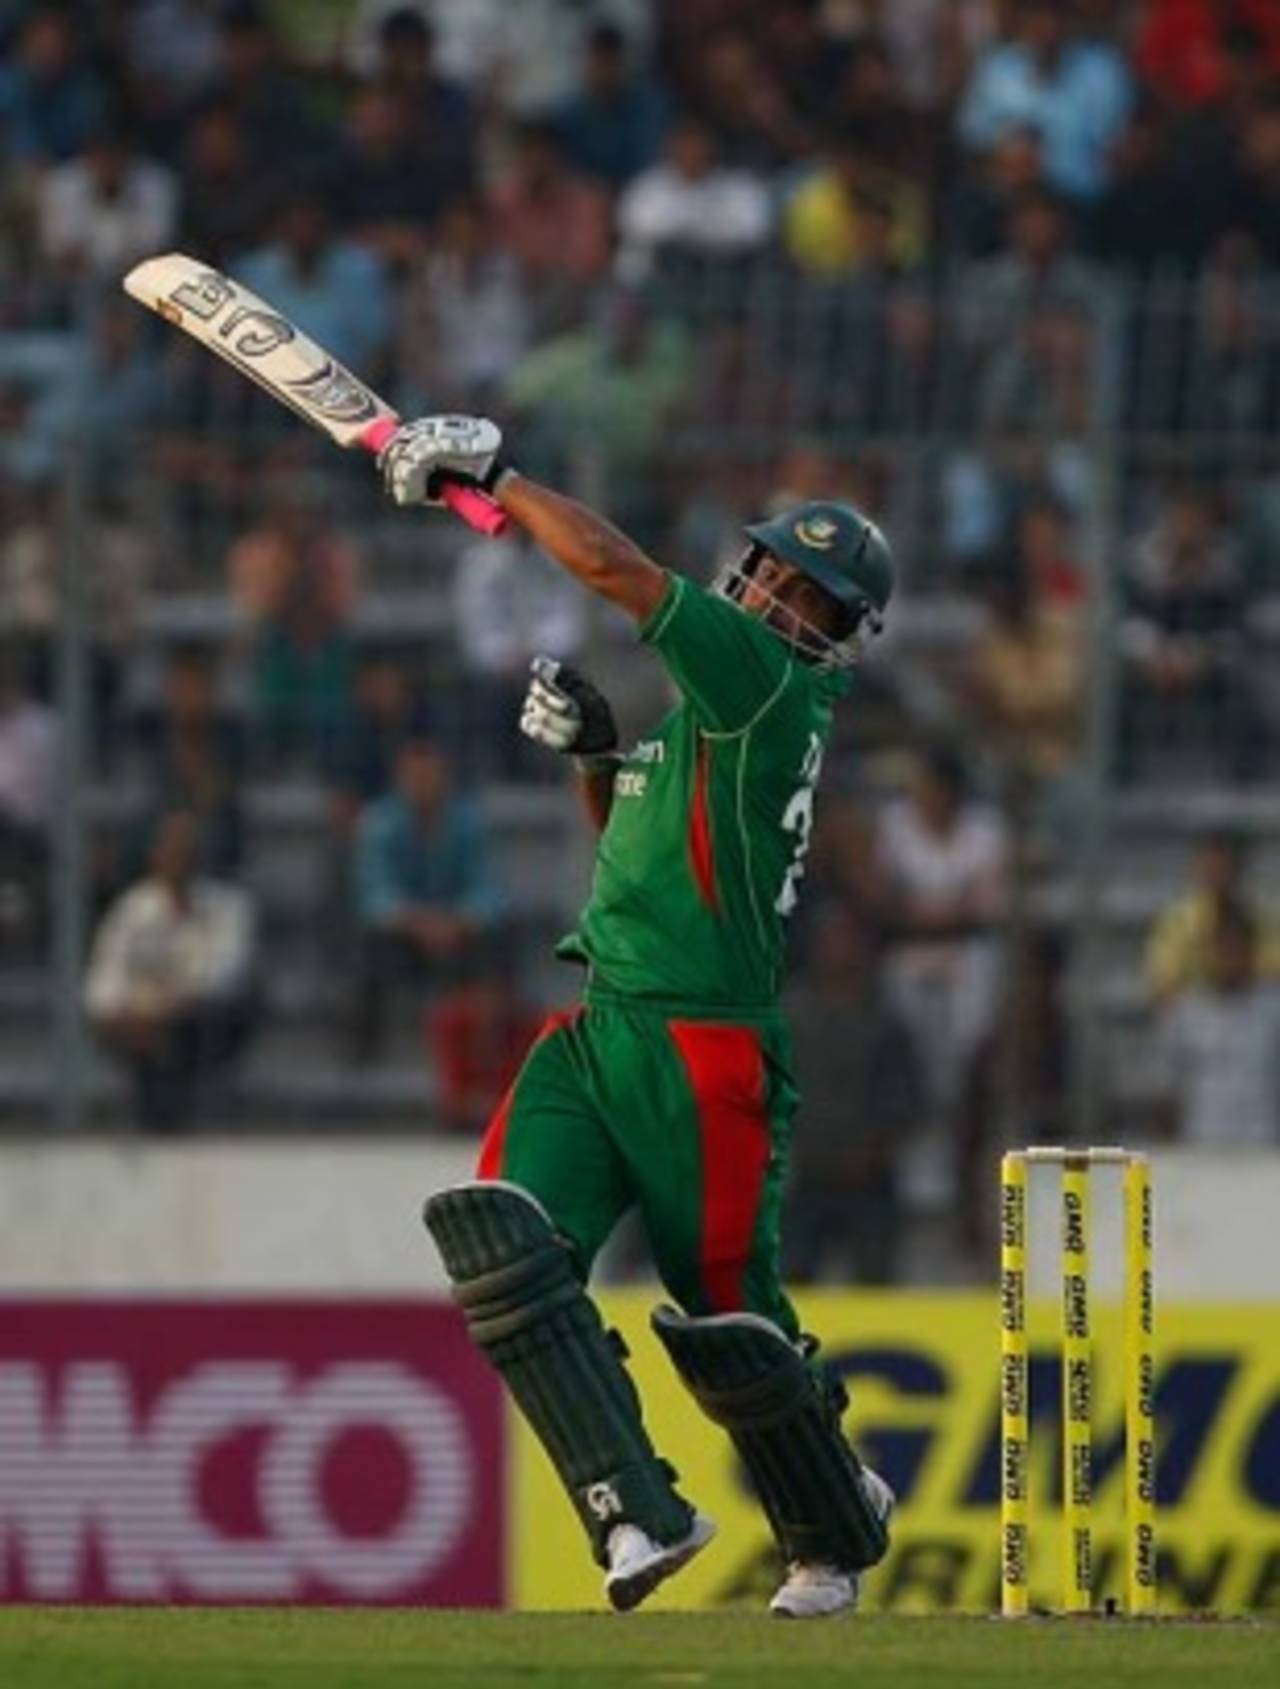 Tamim Iqbal's hundred deserved more support from his team-mates, but Bangladesh still struggle to find the ideal batting tempo&nbsp;&nbsp;&bull;&nbsp;&nbsp;Getty Images